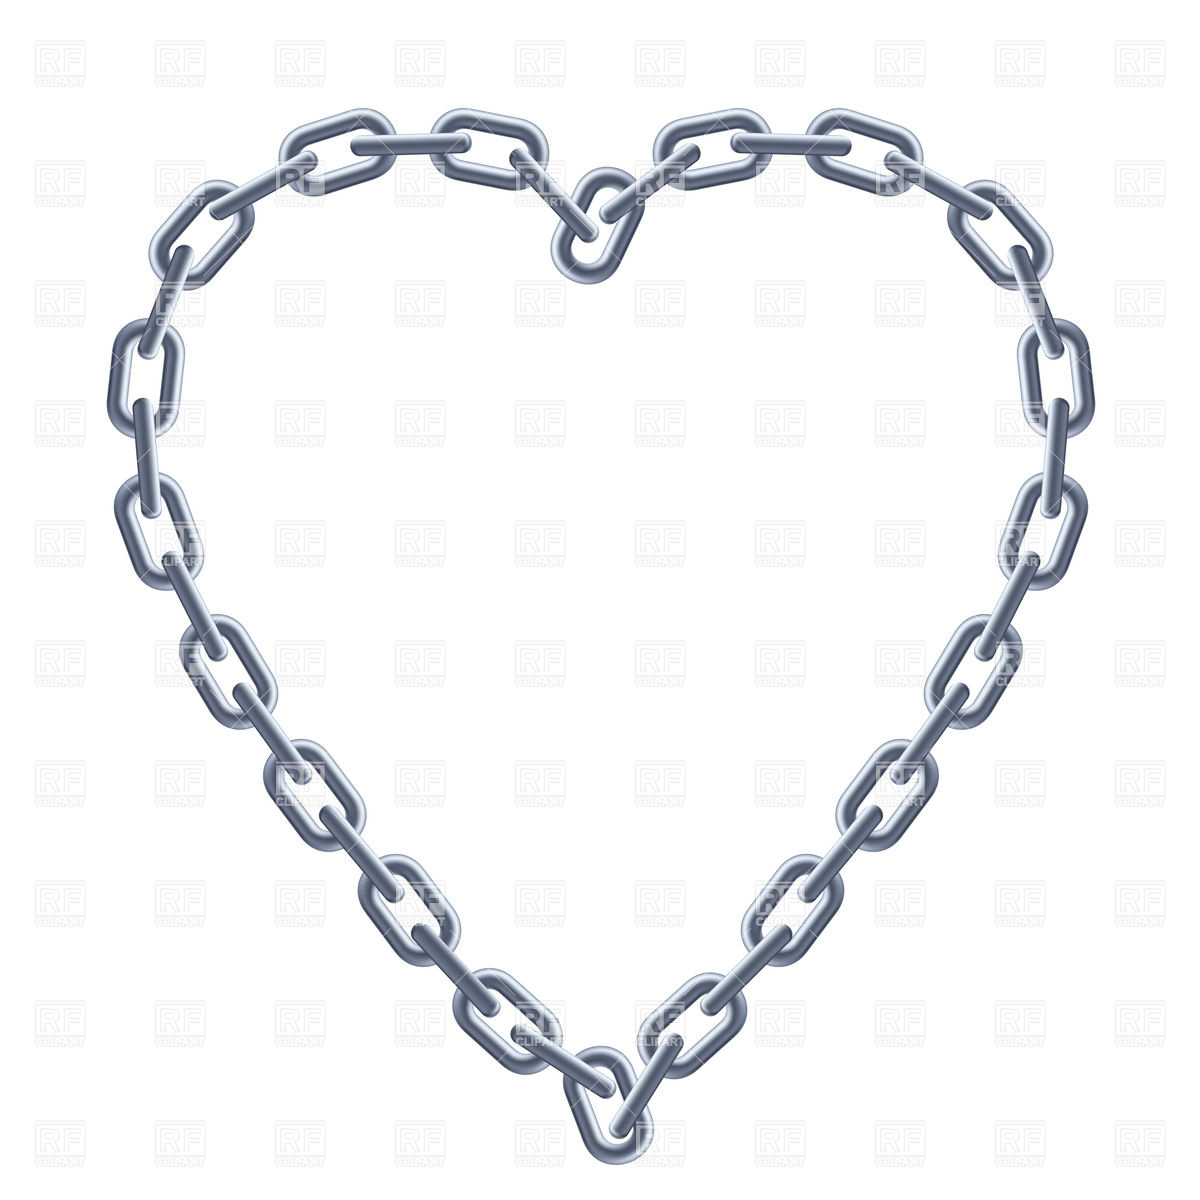 Heart Shaped Silver Chain Frame Download Royalty Free Vector Clipart